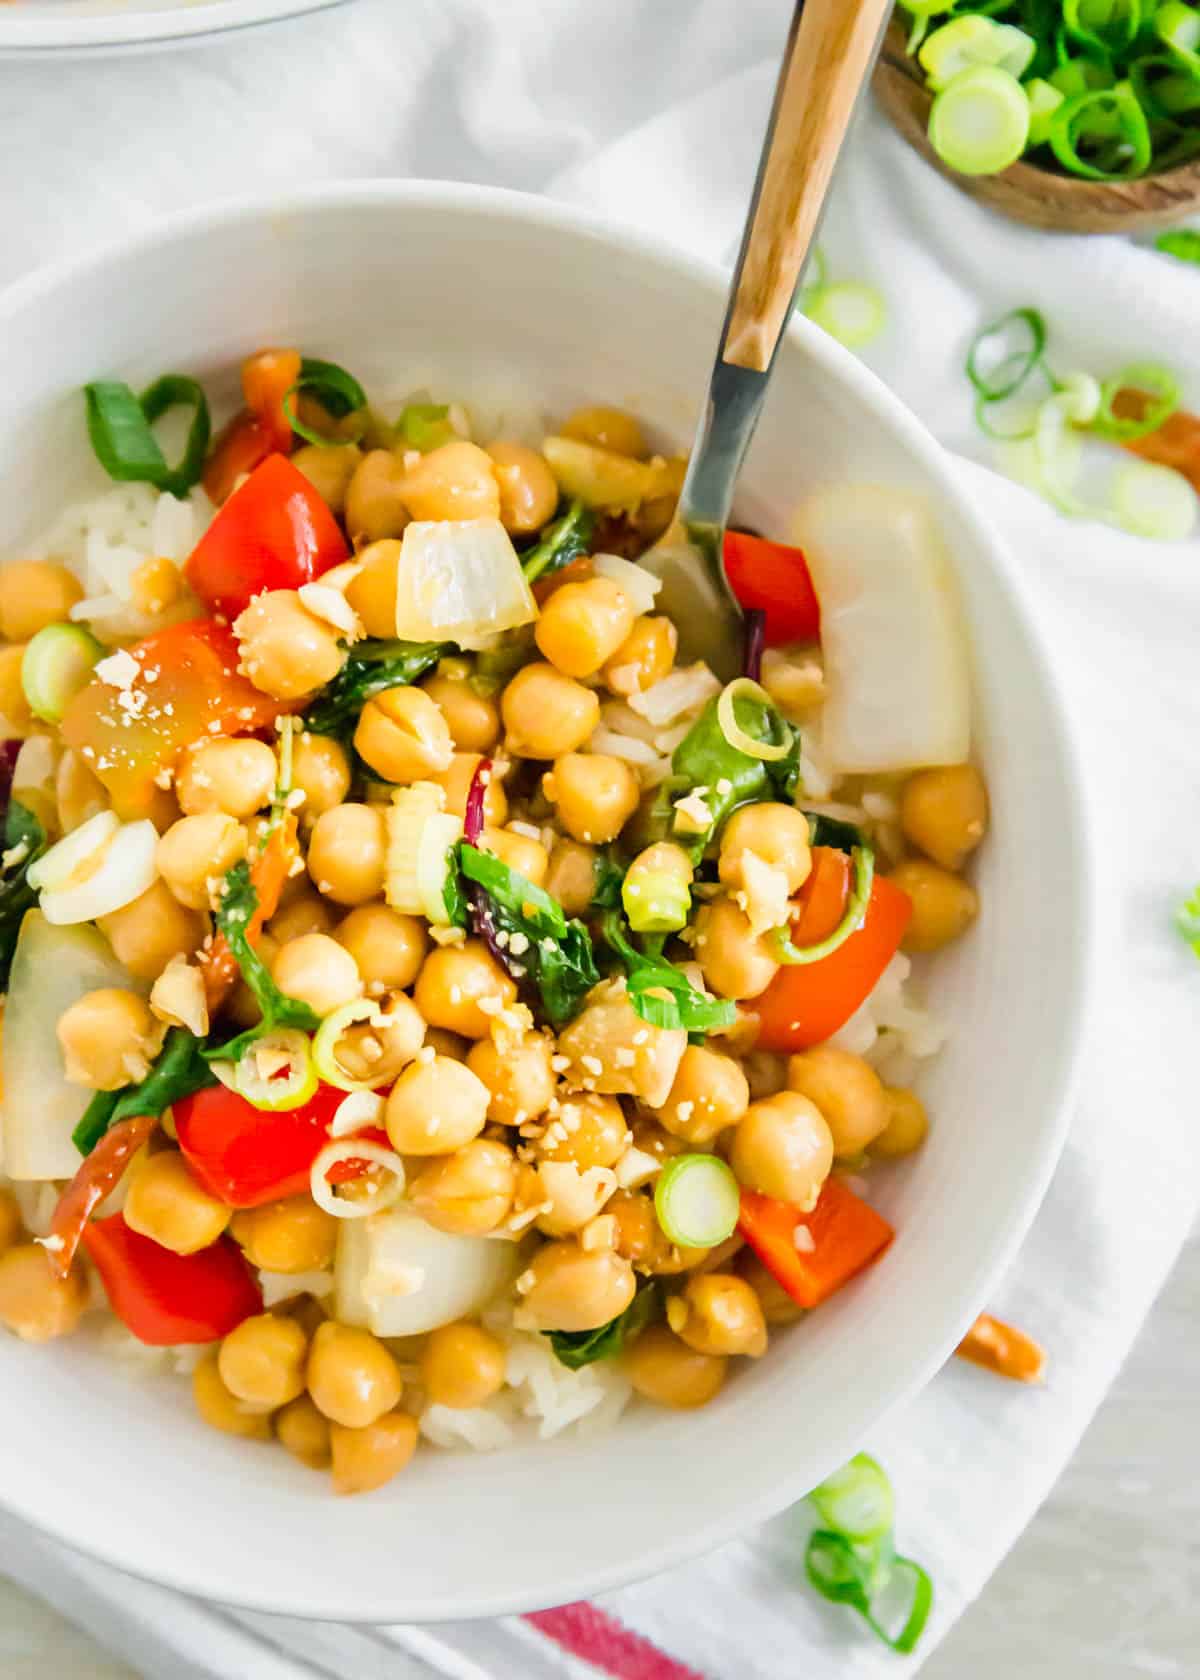 Now you can enjoy your favorite Chinese takeout dish in a healthier, vegetarian way with this chickpea Kung Pao recipe ready in just 25 minutes.